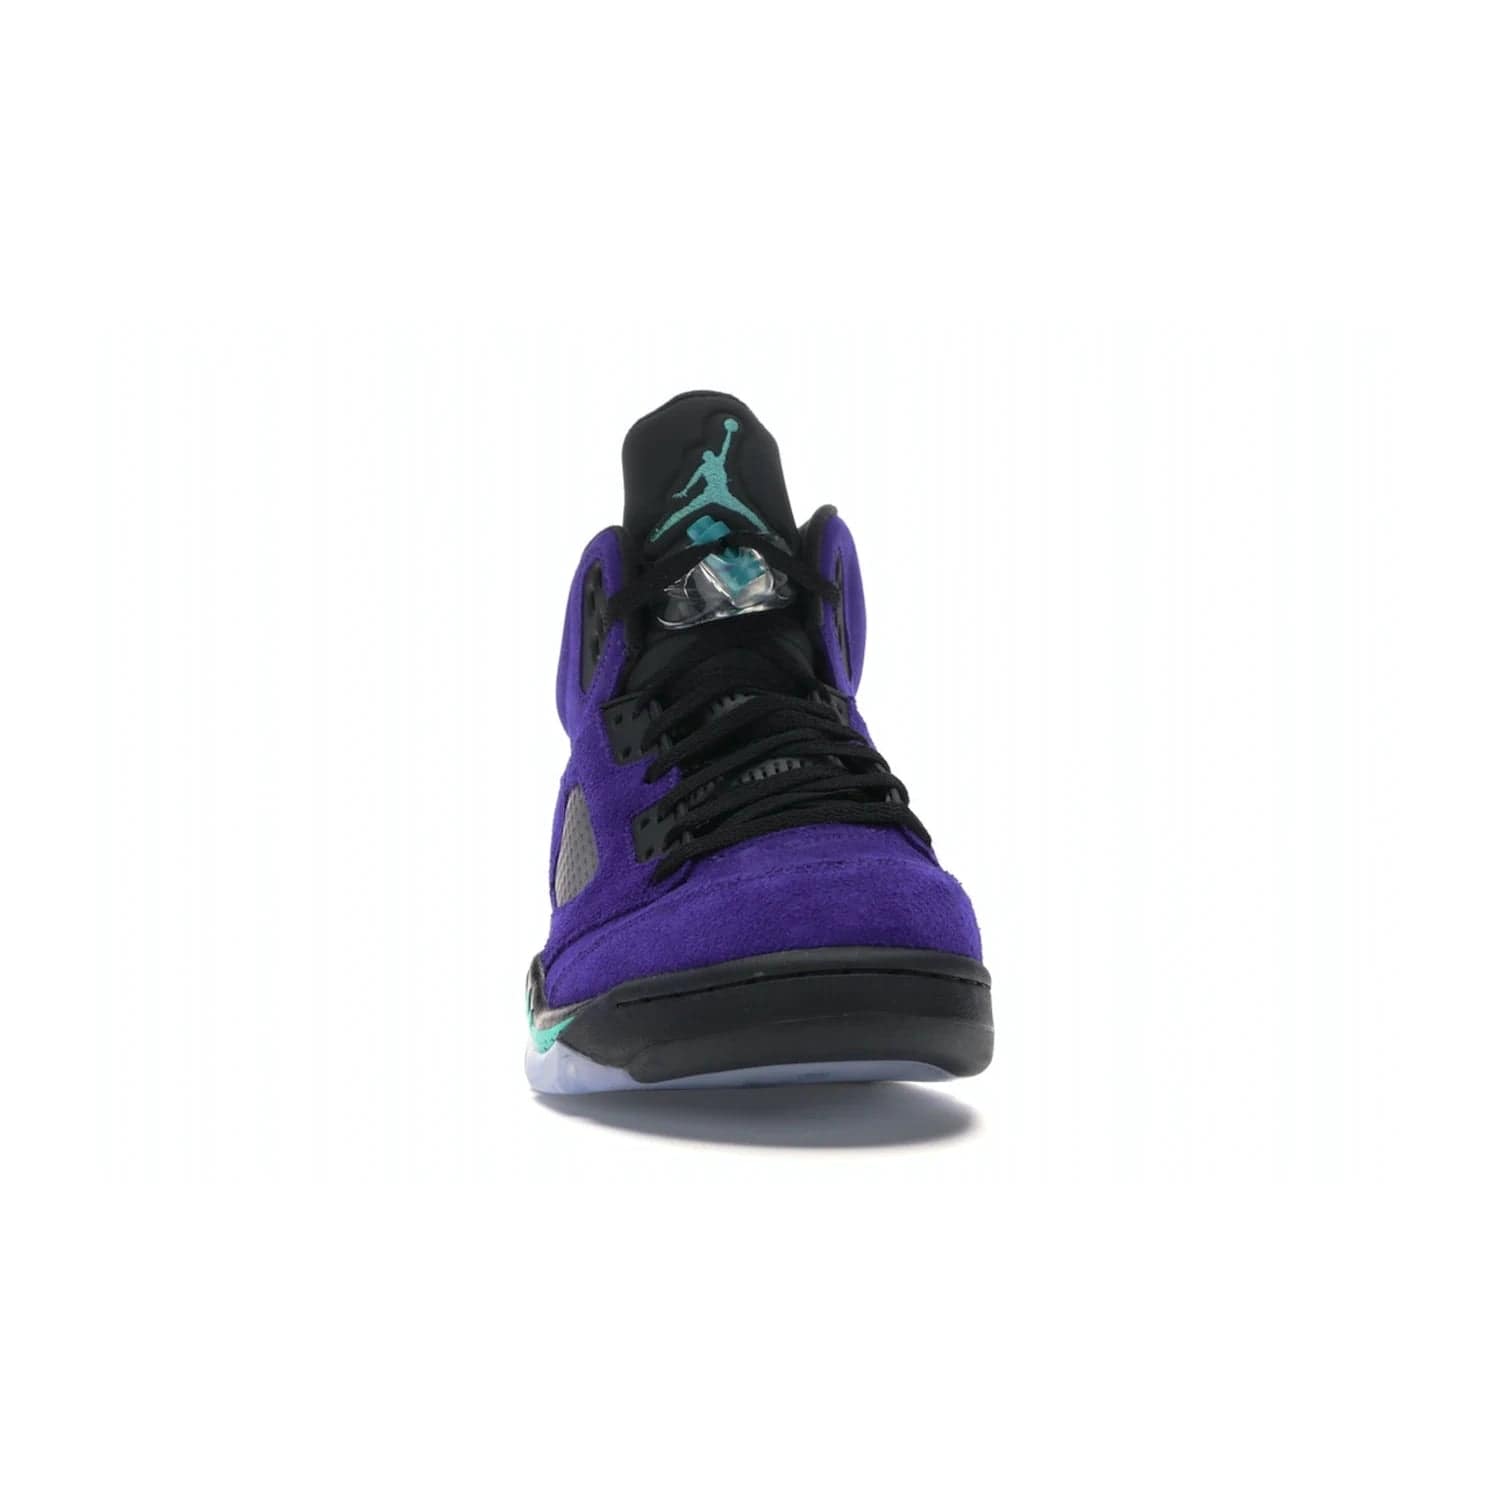 Jordan 5 Retro Alternate Grape - Image 9 - Only at www.BallersClubKickz.com - Bring the classic Jordan 5 Retro Alternate Grape to your sneaker collection! Featuring a purple suede upper, charcoal underlays, green detailing, and an icy and green outsole. Releasing for the first time since 1990, don't miss this chance to add a piece of sneaker history to your collection.